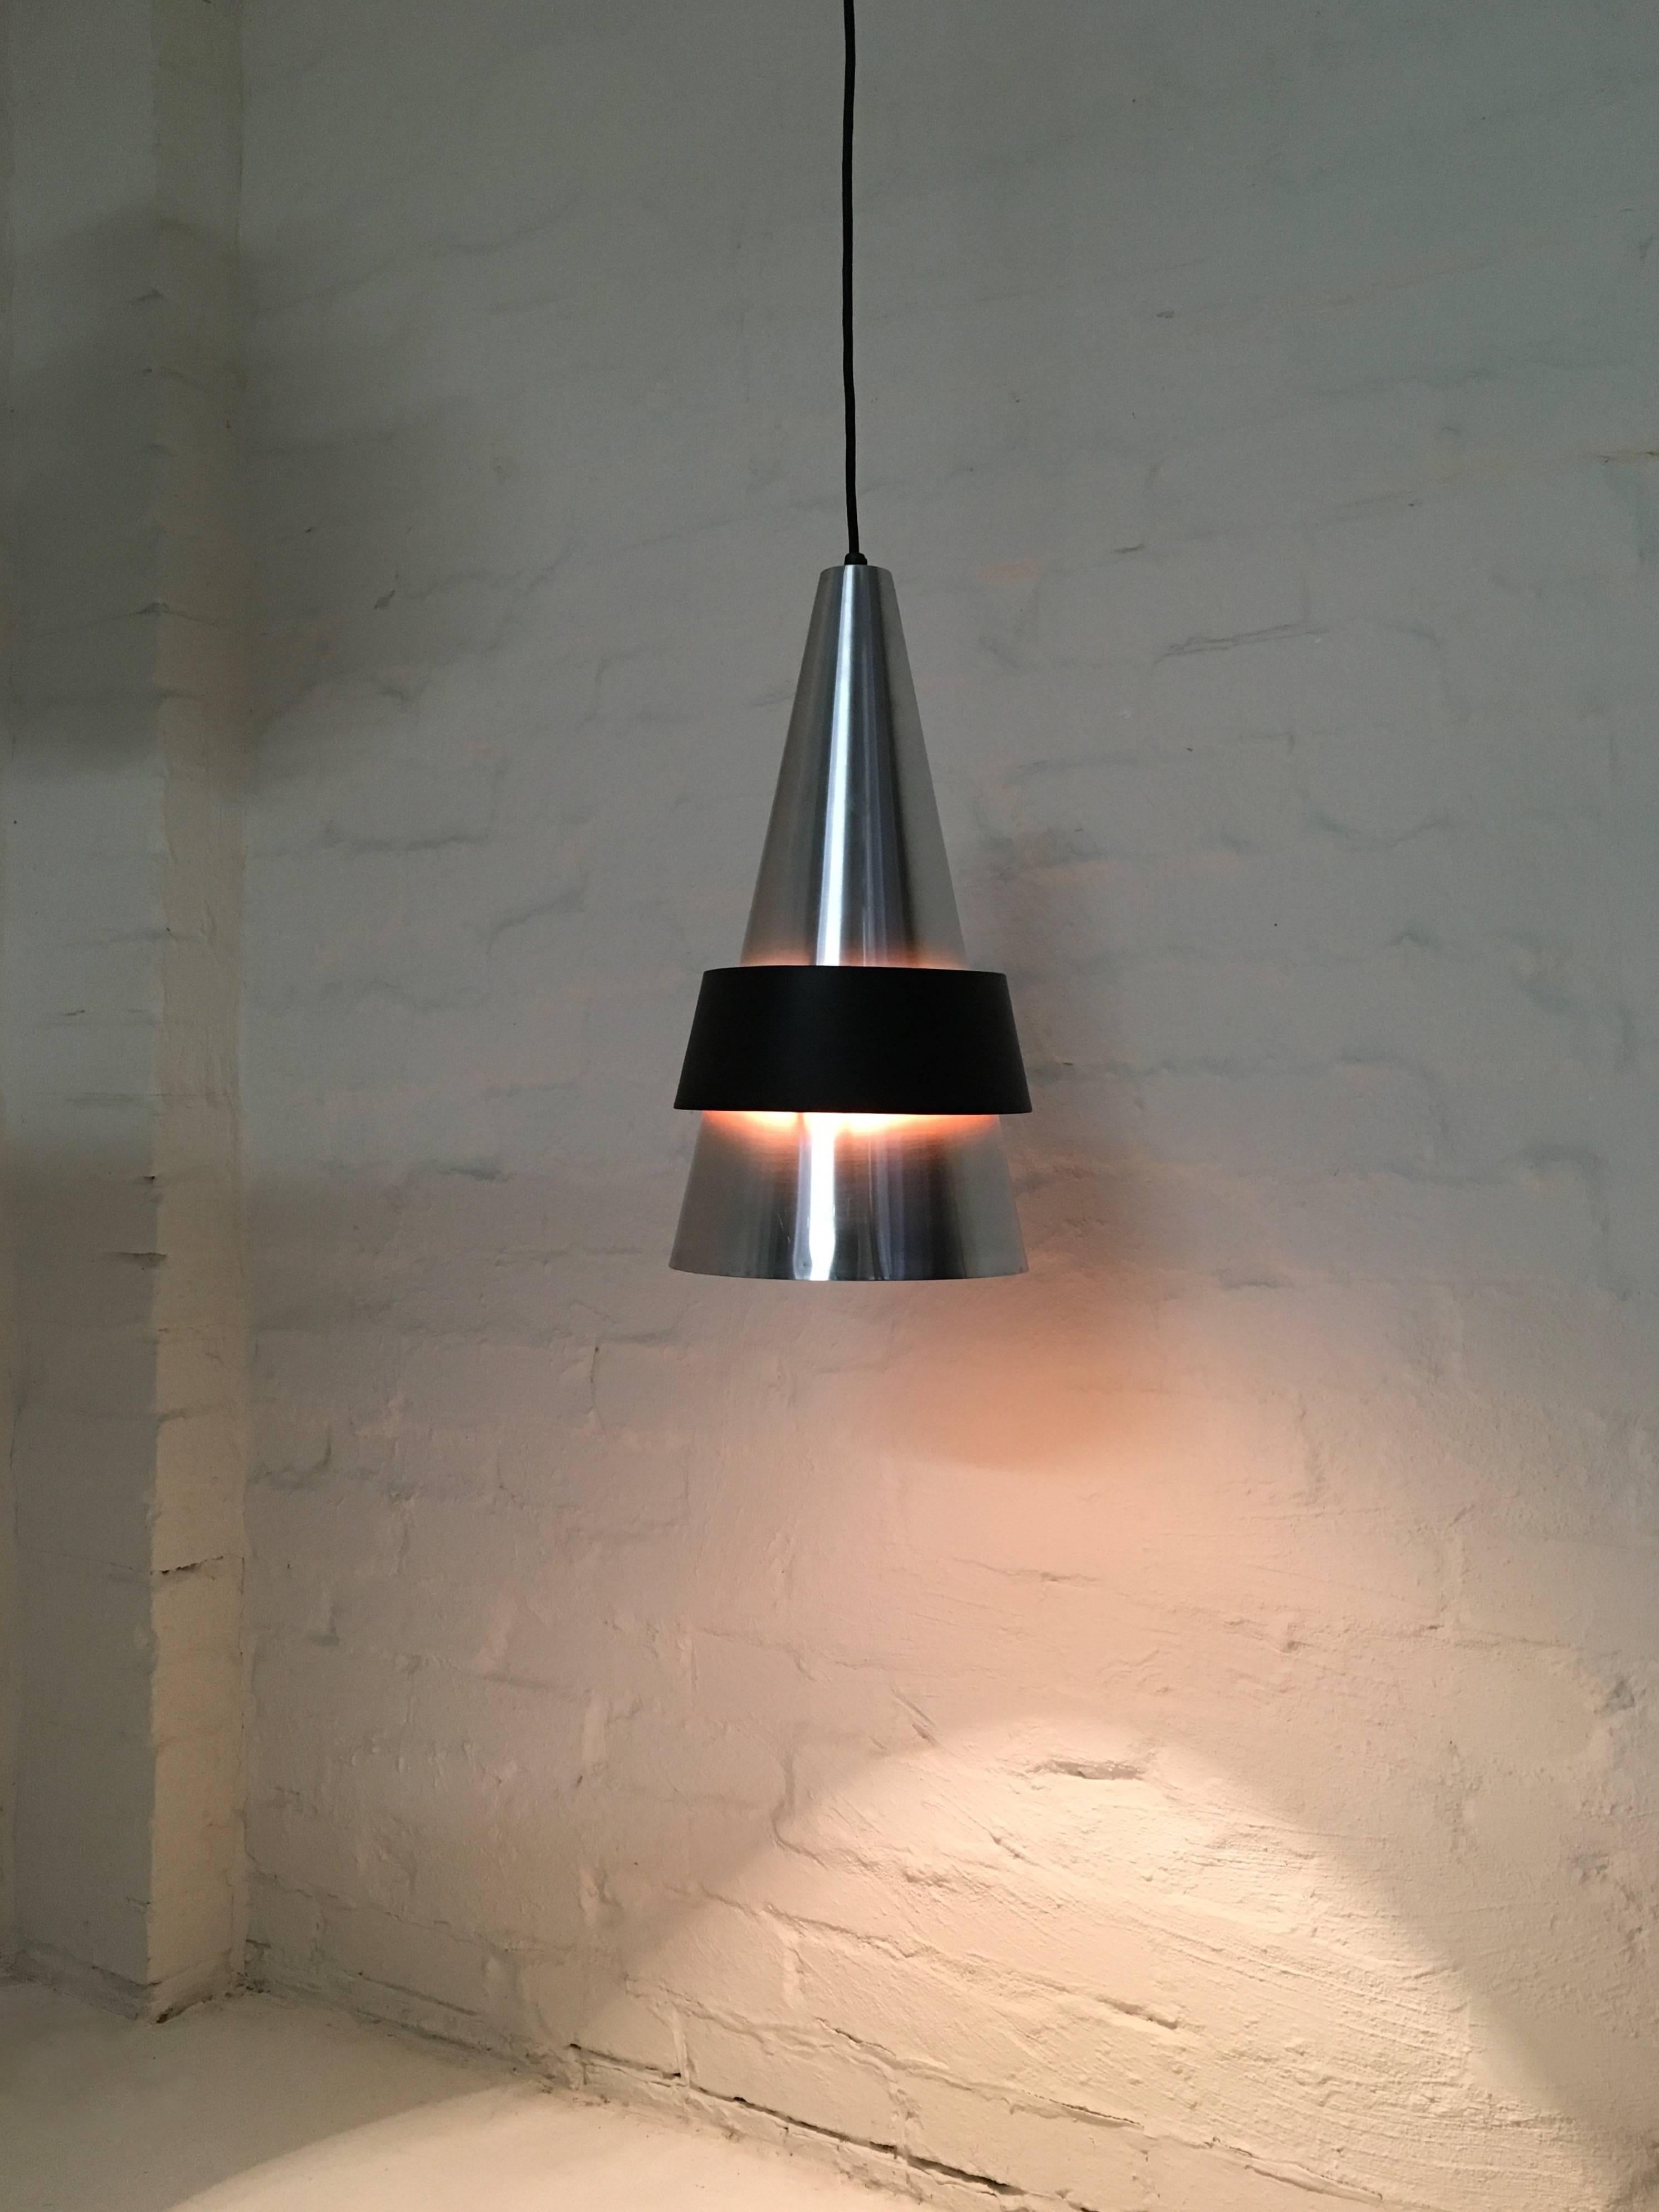 Jo Hammerborg's beautiful cone shaped Corona pendant was produced by Fog and Mørup in Denmark in 1963. Someone at that time in Australia took a liking to the design and had it reproduced in spun aluminium and steel, to the exact shape and size